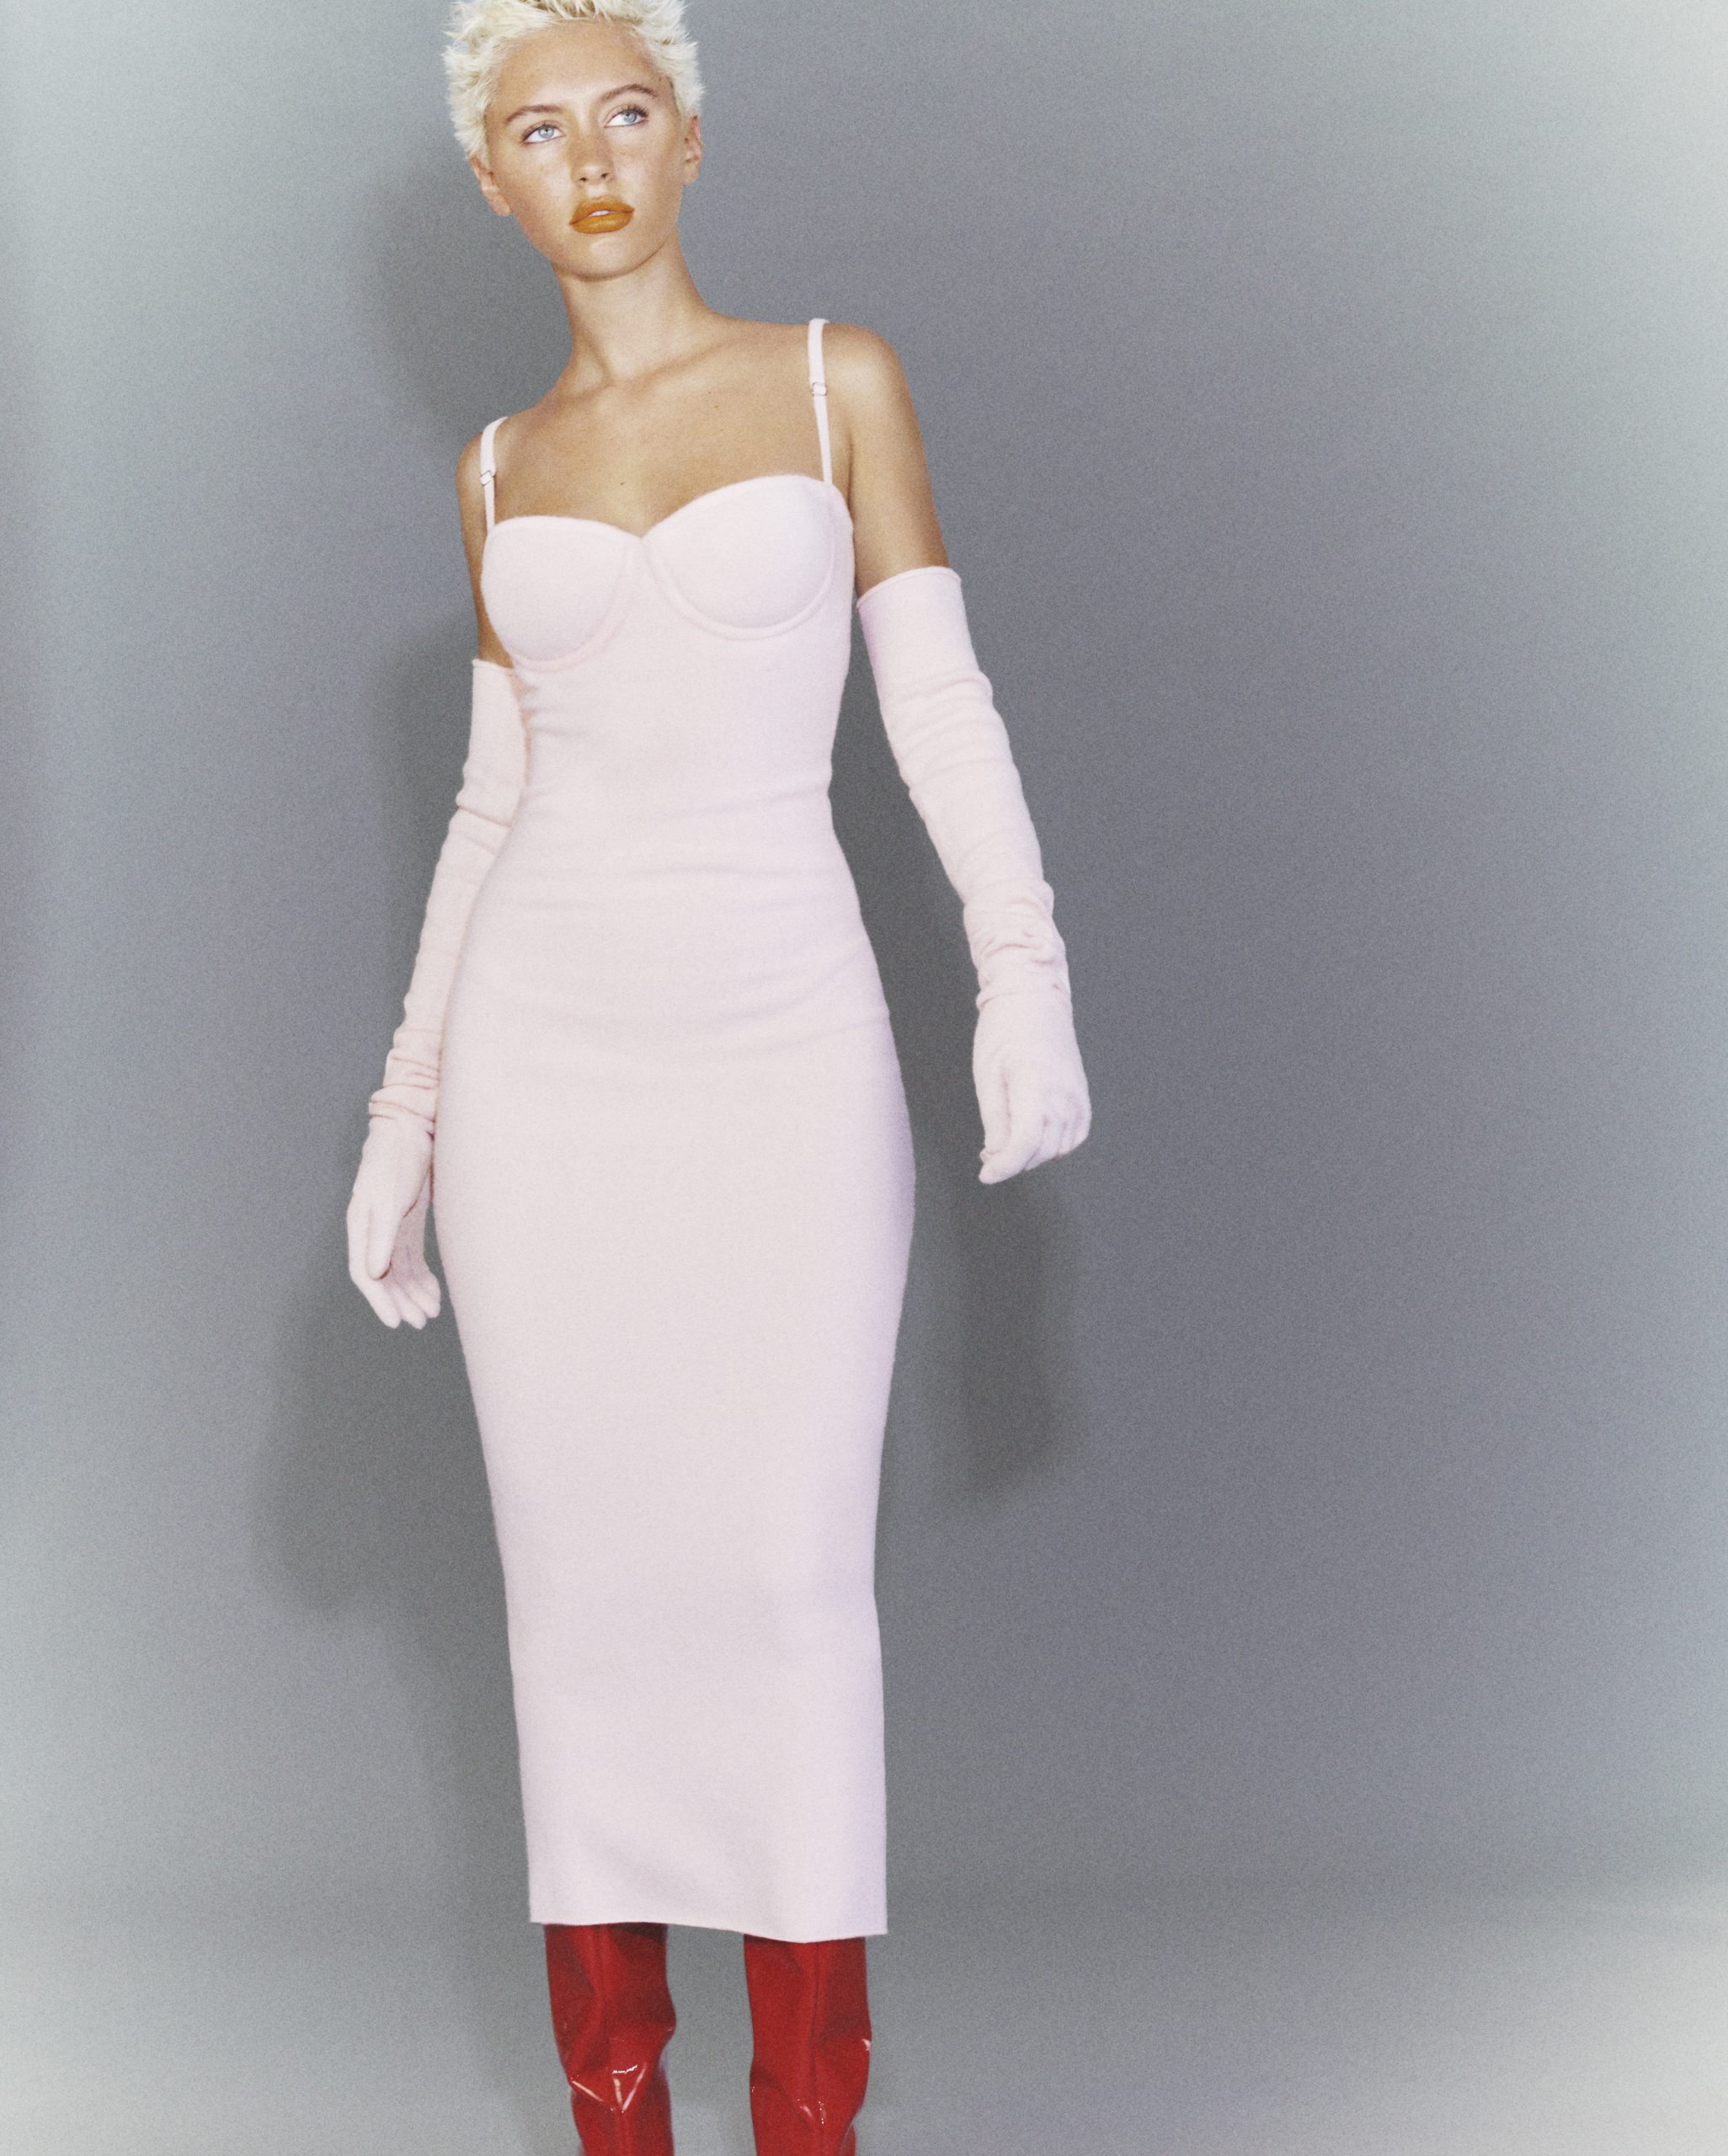 , Sportmax ToBeLovedByYou FW &#8217;22/&#8217;23 Capsule Knitwear Collection Inspired by Iconic Marilyn Monroe